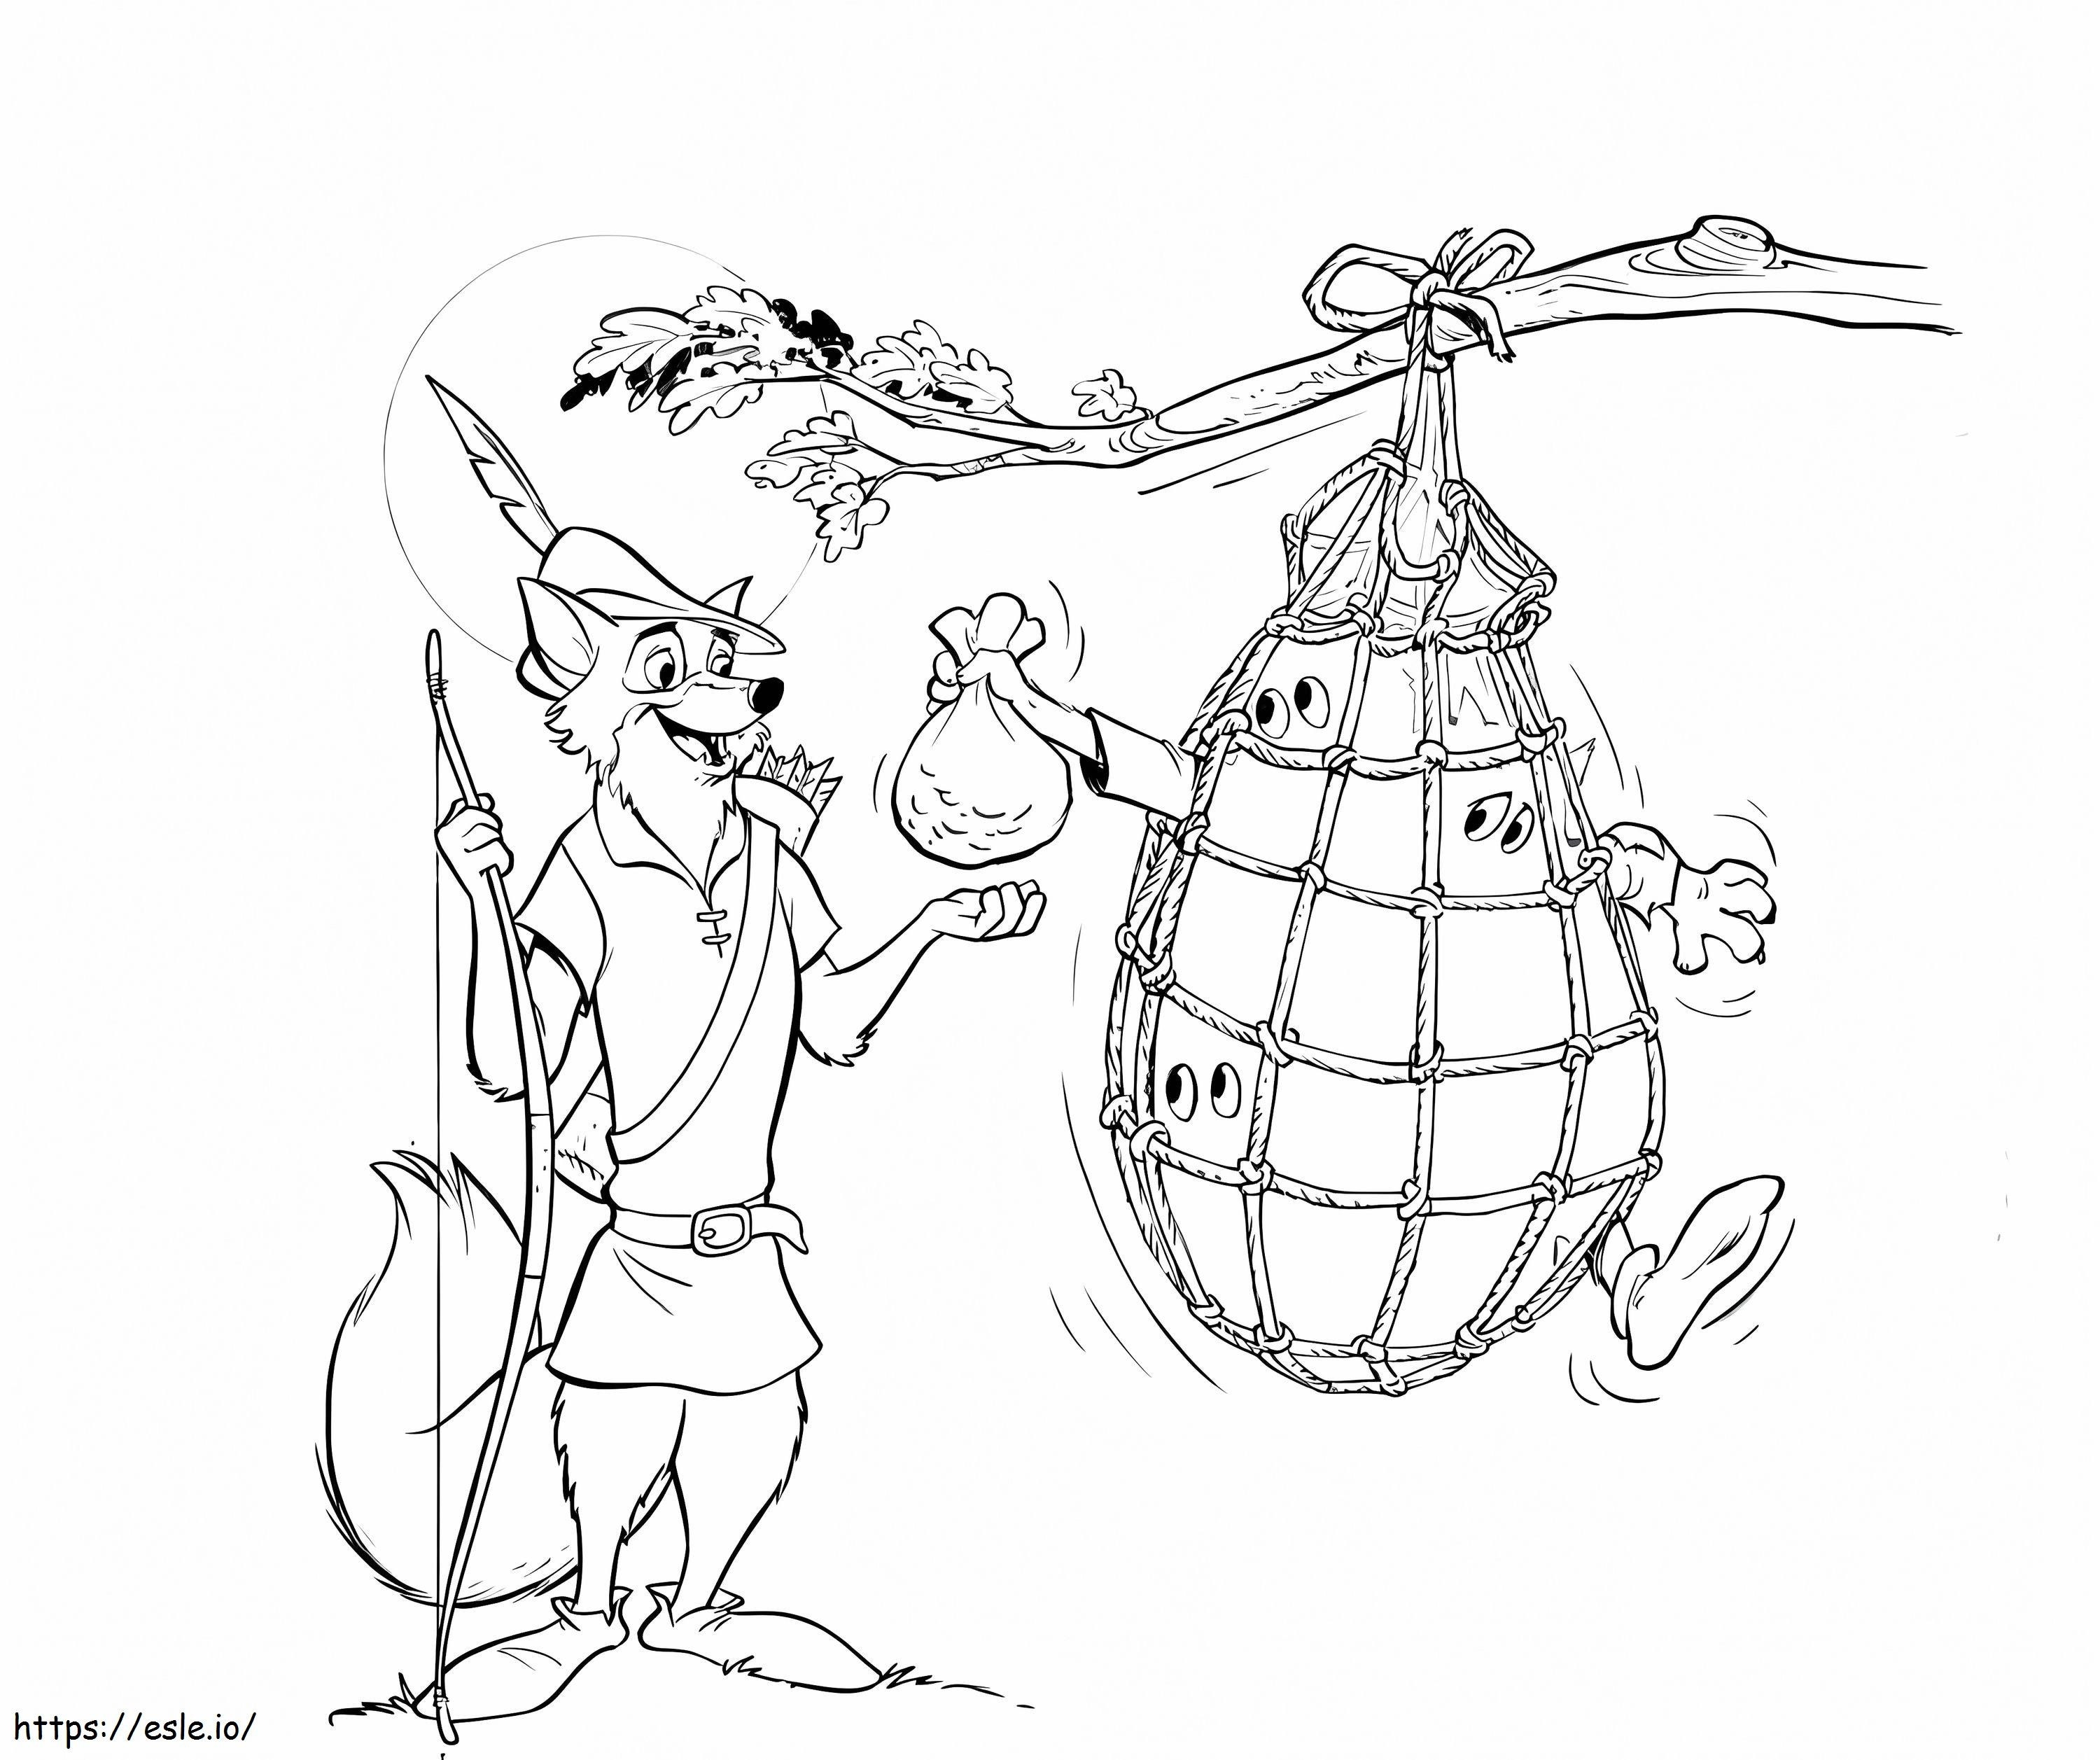 Robin Hood 10 coloring page